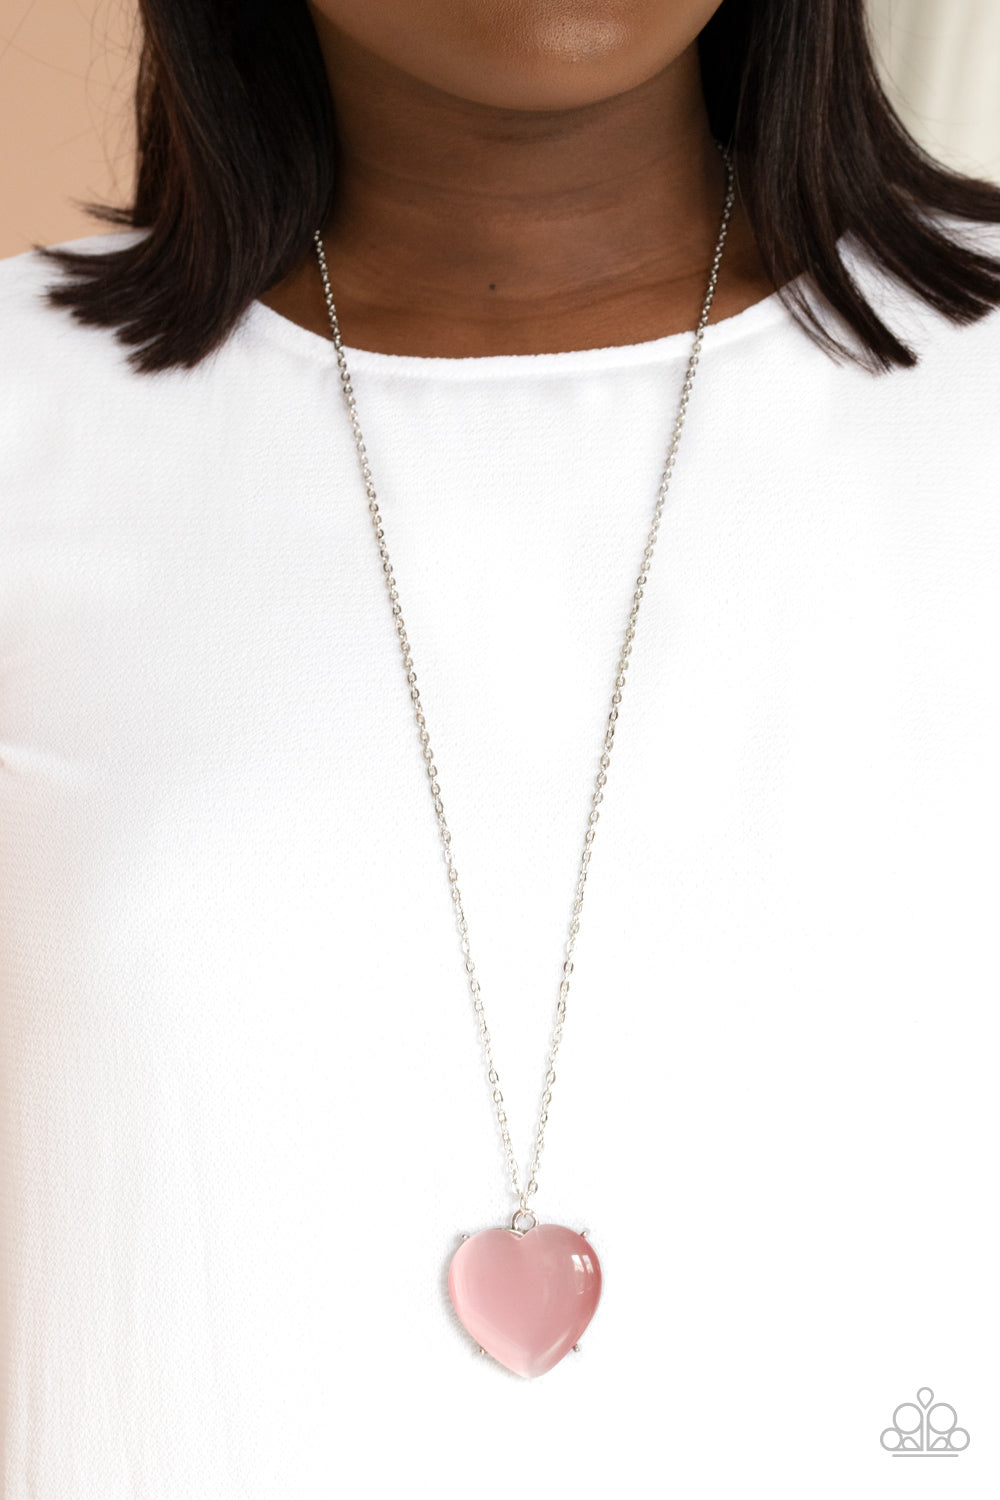 Paparazzi ♥ Warmhearted Glow - Pink ♥  Necklace